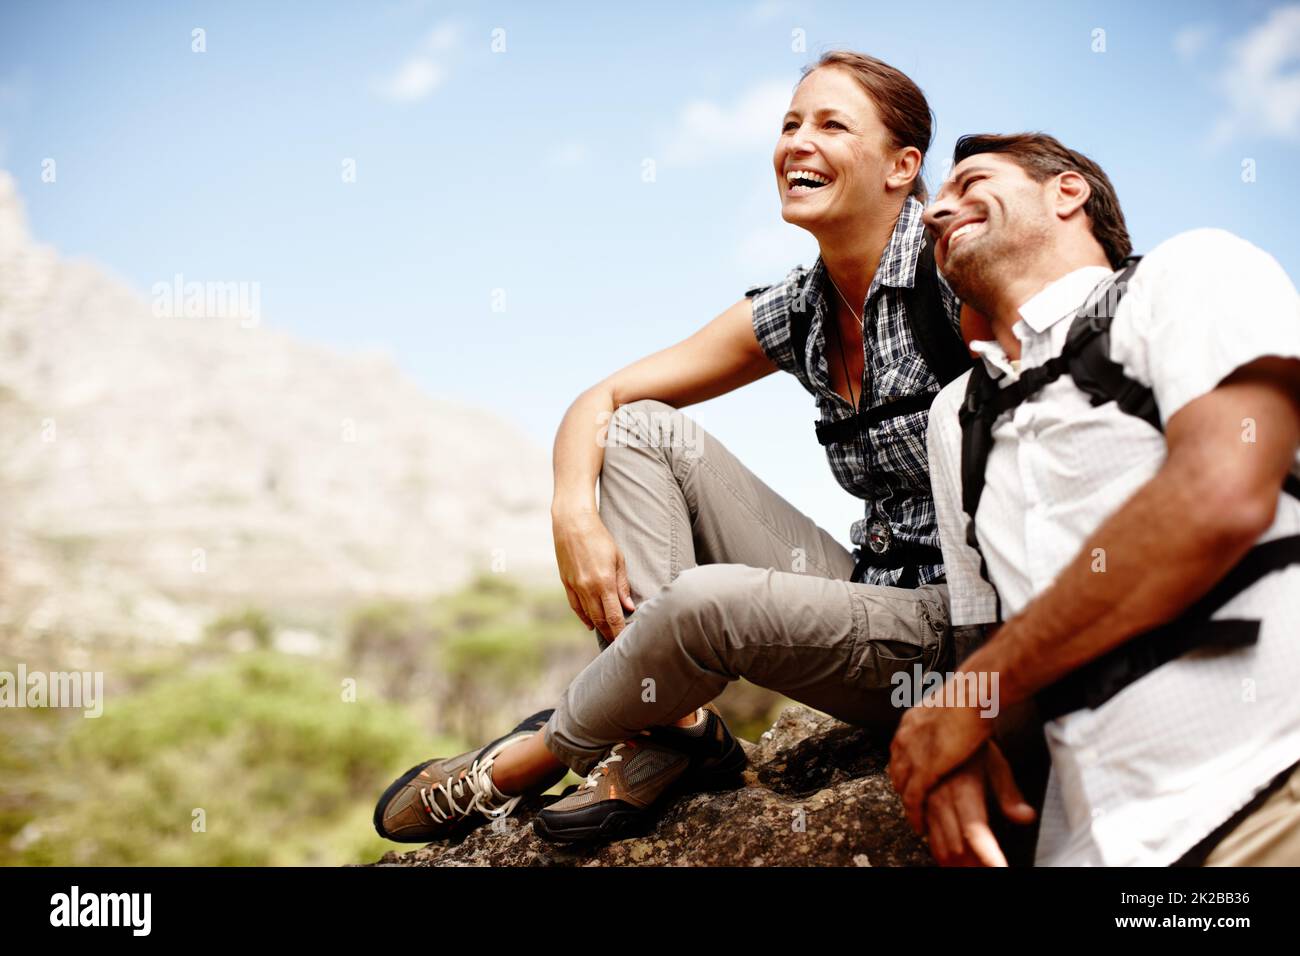 Romance out in nature. Two hikers laughing and smiling while enjoying a mountain top view. Stock Photo